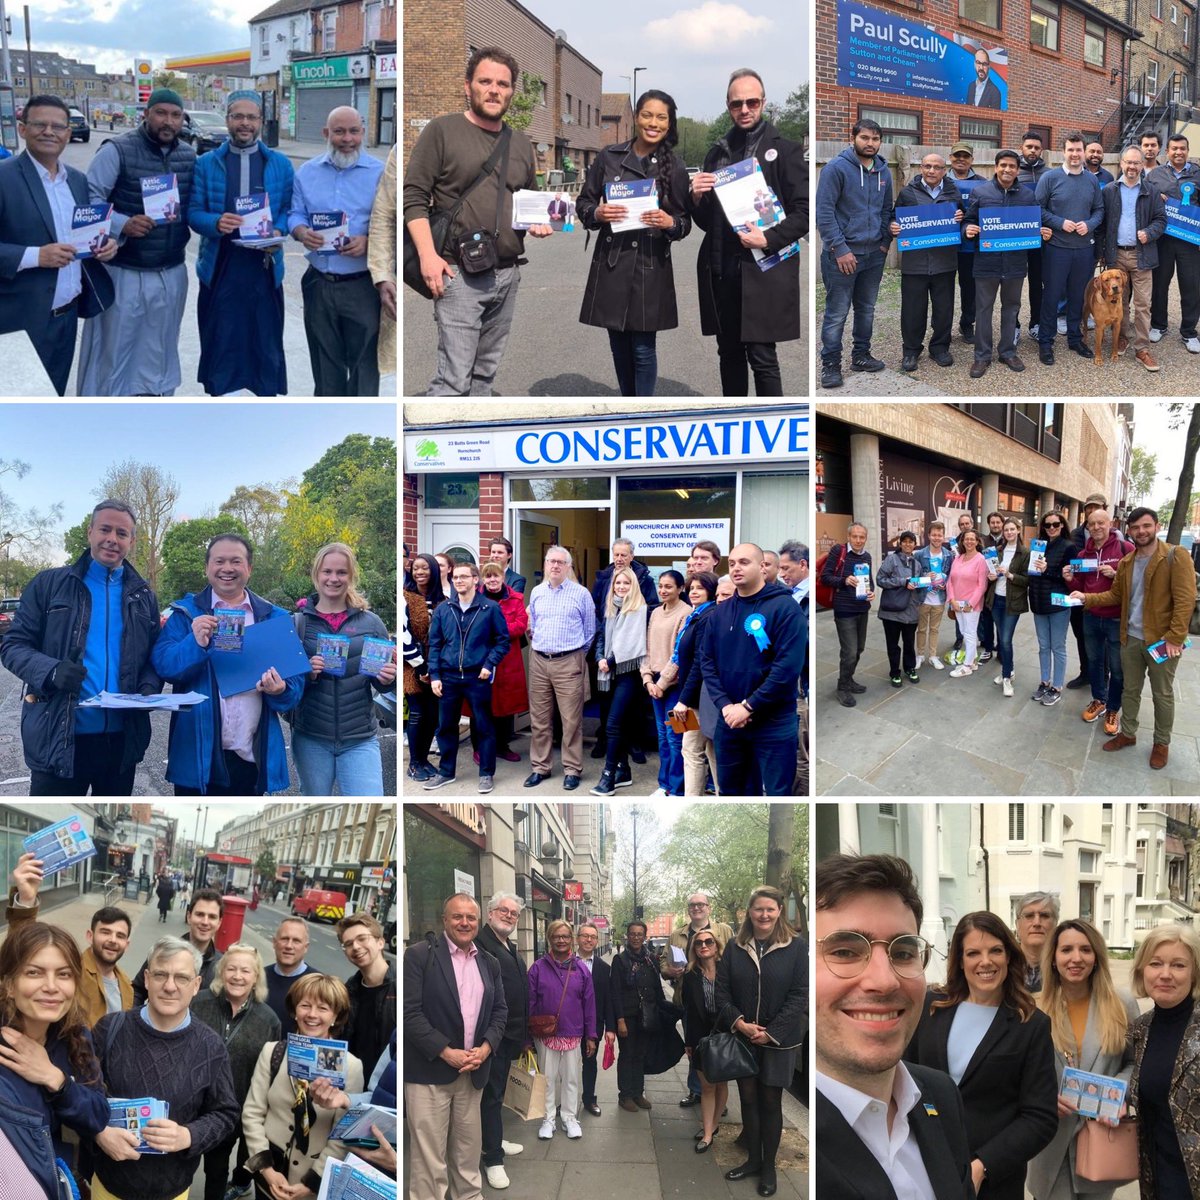 So much enthusiasm all over the most beautiful city in the world. #VoteConservatives #LetsGetItDone #LocalElections2022 #TeamLondon
@CCACllrs @LdnConservative @OliverDowden @benwelliot @RishiSunak @LukeHall @CLWCA @BOS_CA @BGBConservative @BSIConservative @BGBConservative.